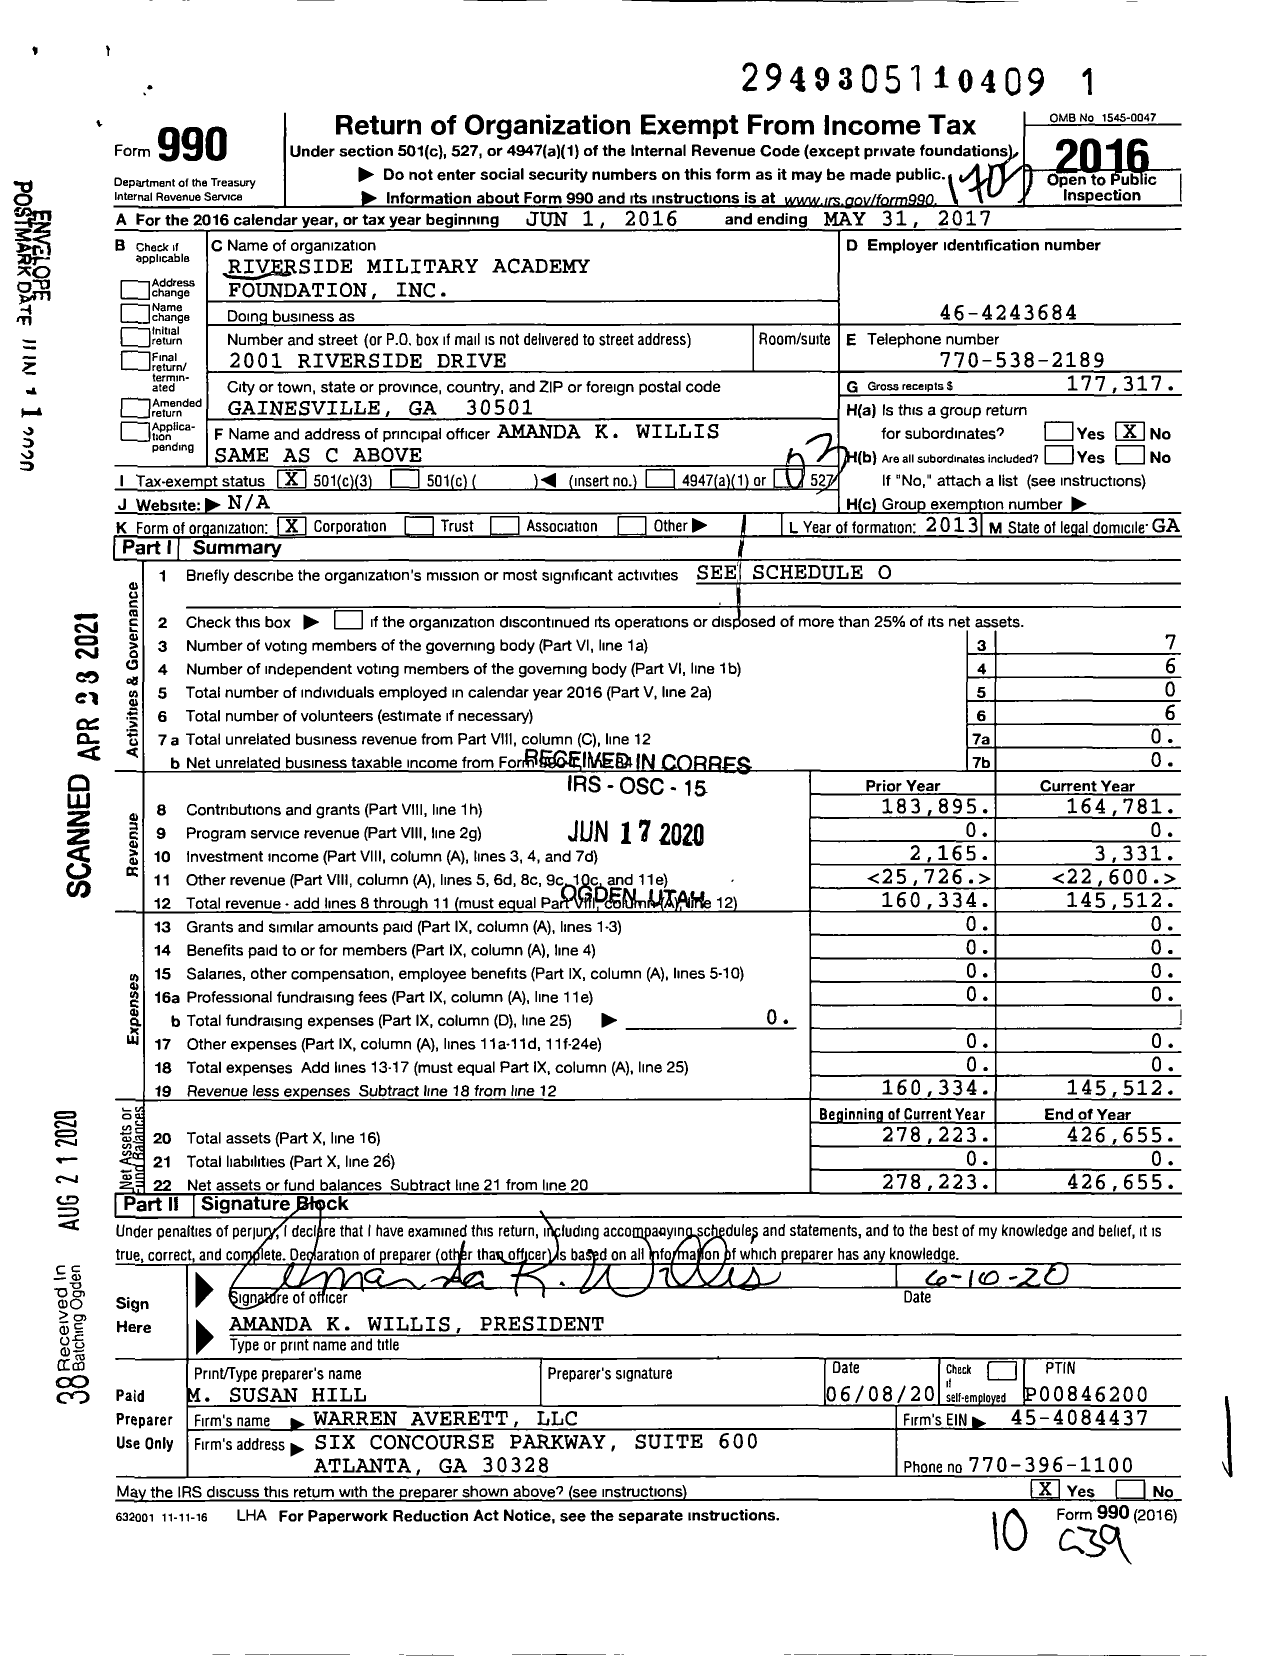 Image of first page of 2016 Form 990 for Riverside Military Academy Foundation